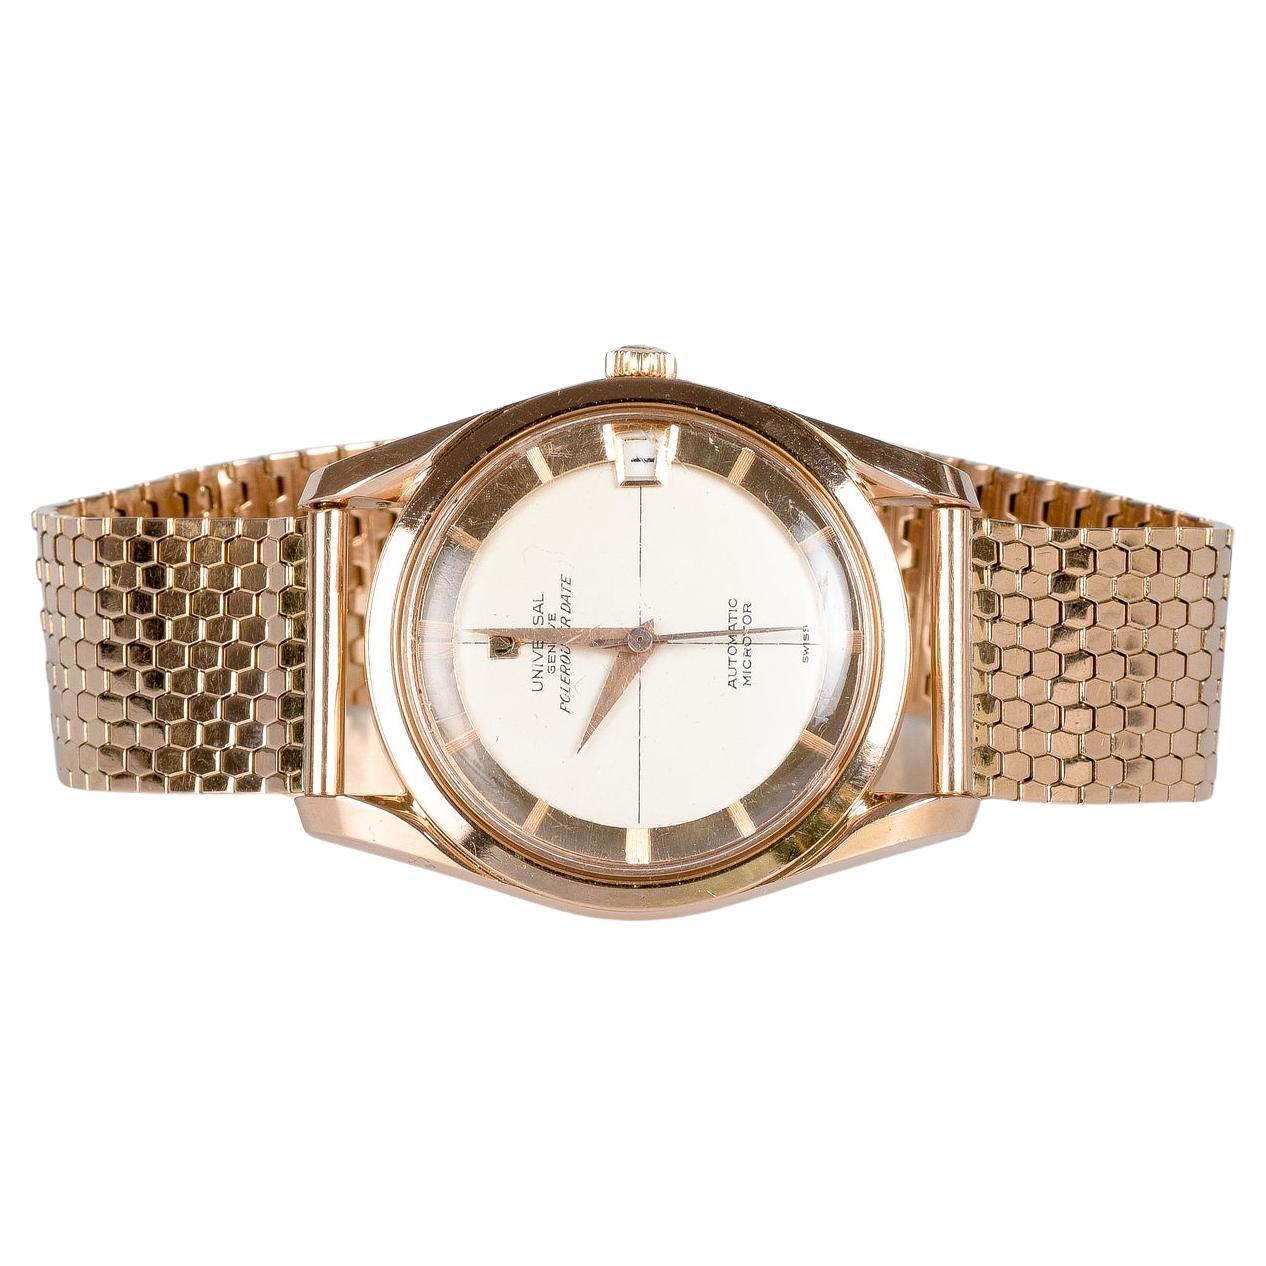 Watch in 18-carat yellow gold from the Swiss company Universal Genève Polerouter